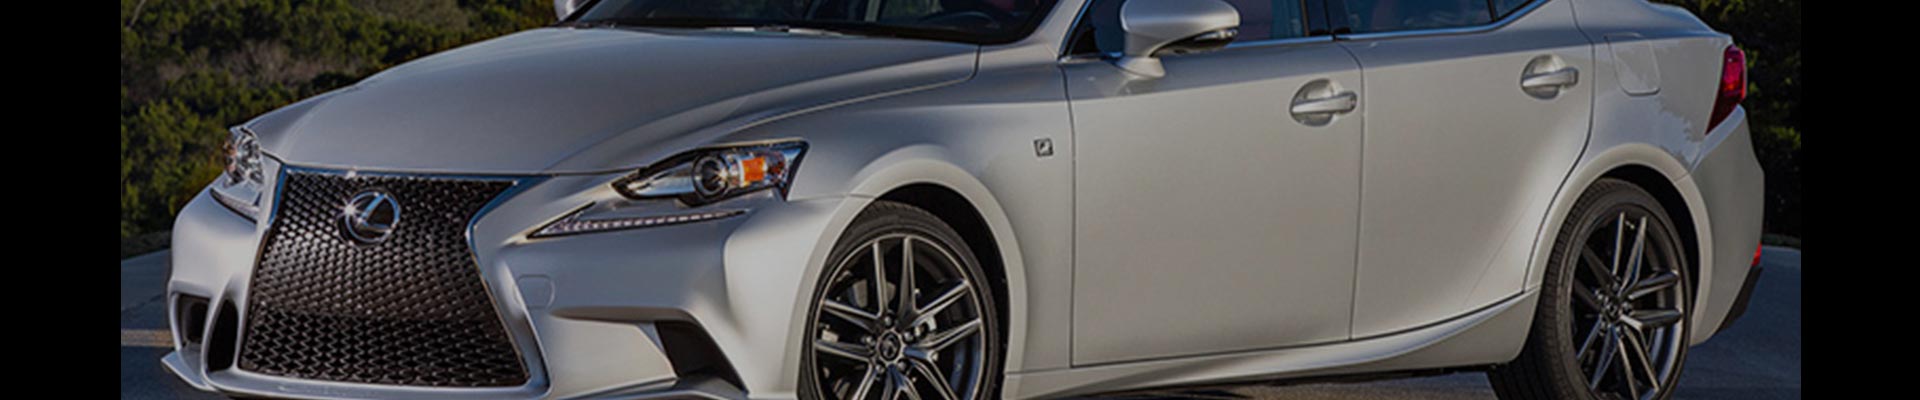 Shop Replacement and OEM 2008 Lexus IS350 Parts with Discounted Price on the Net